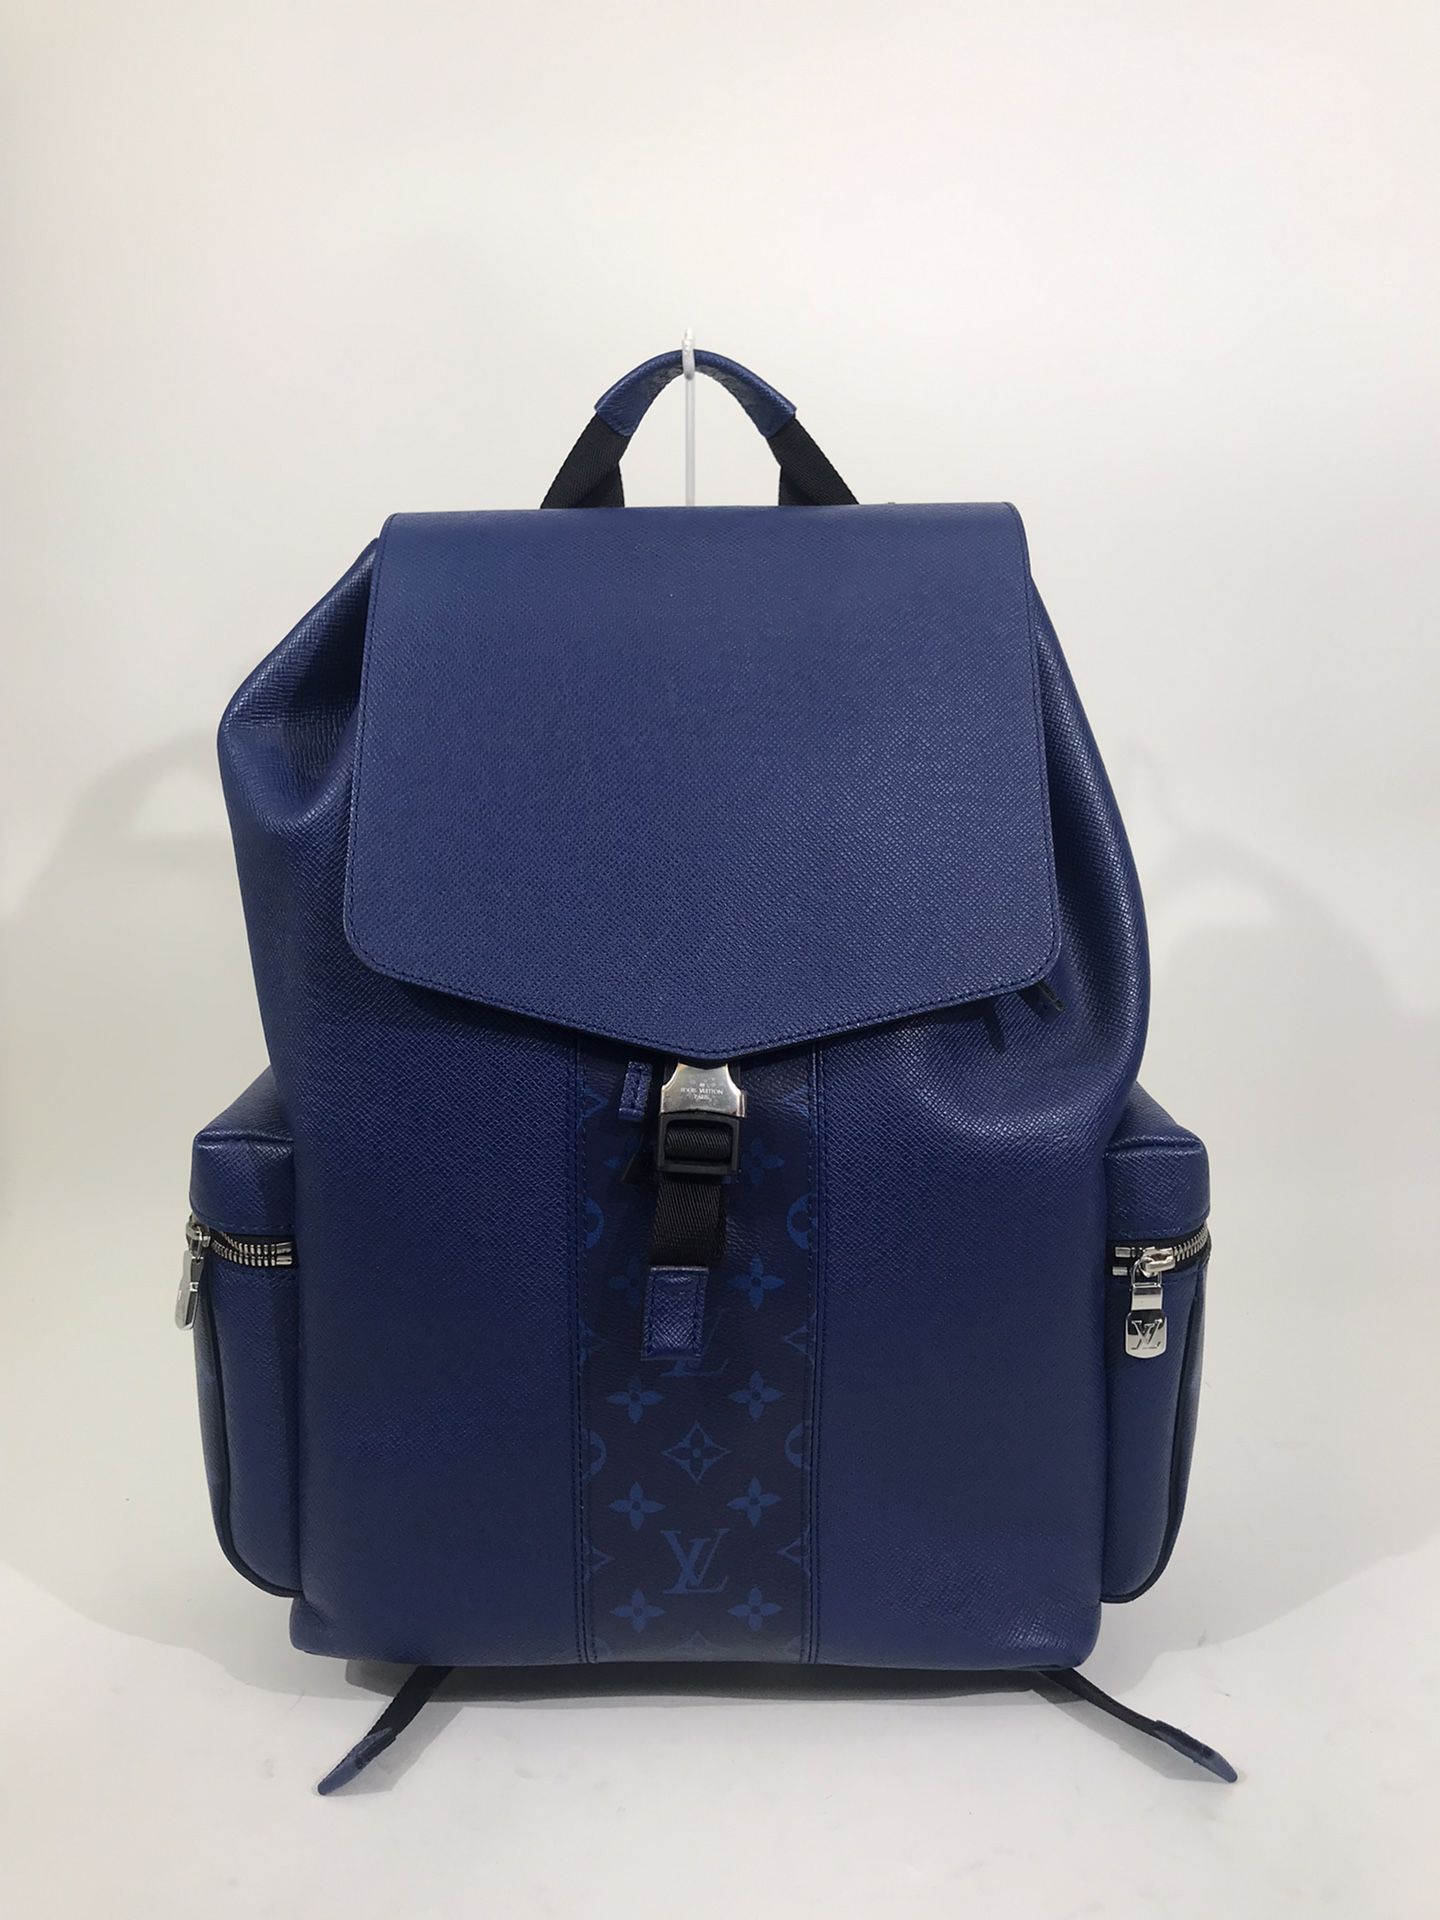 Louis Vuitton Backpack Pacific Blue Taigarama for Sale in Huntington Park,  CA - OfferUp